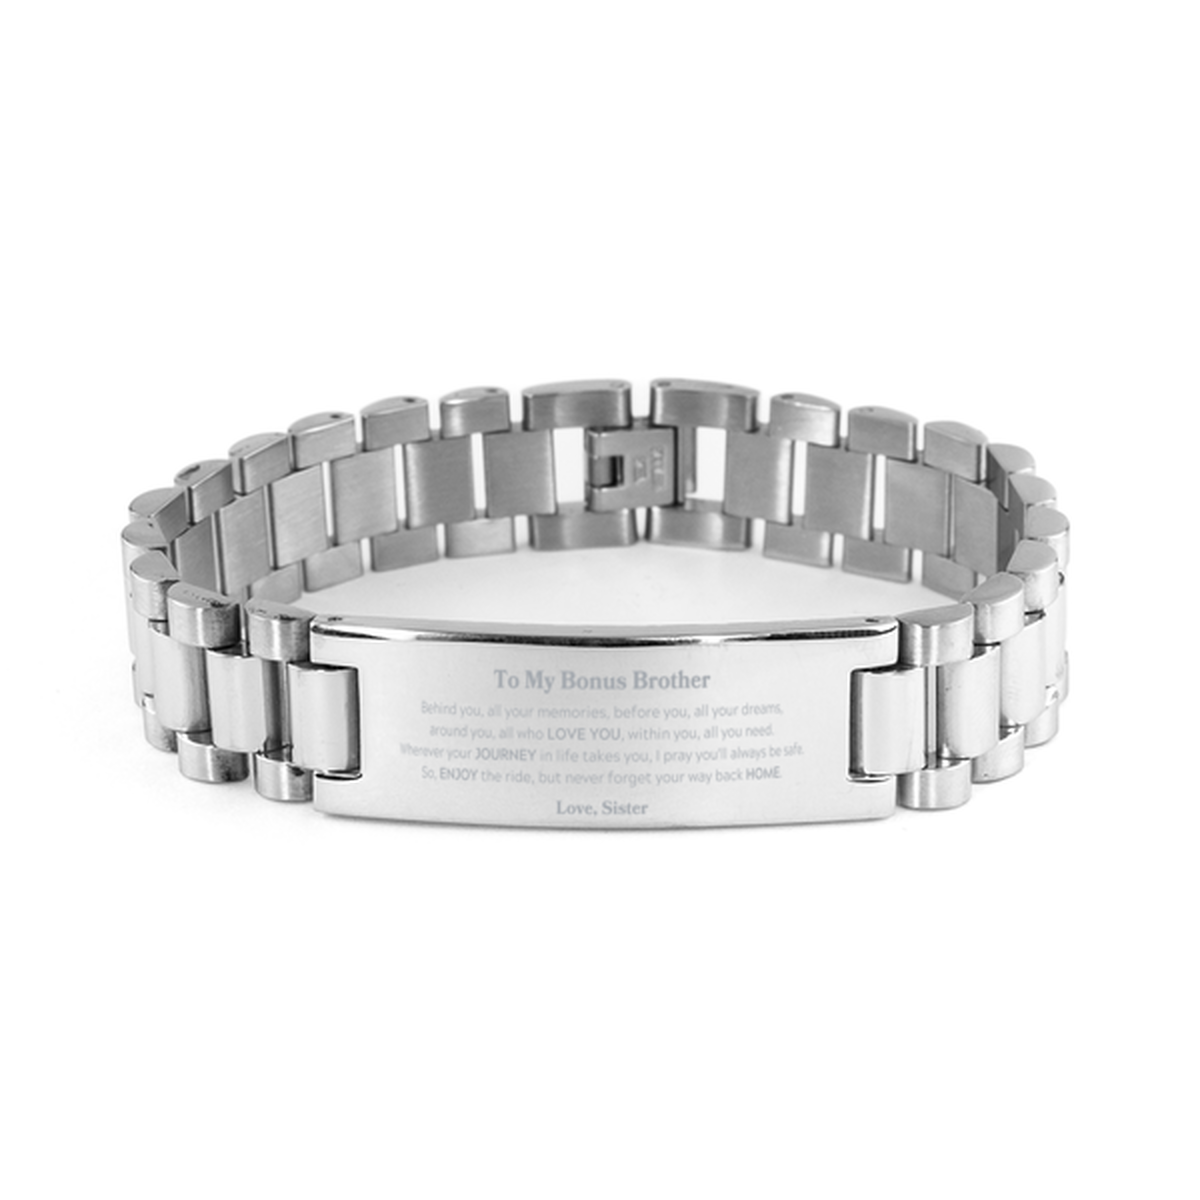 To My Bonus Brother Graduation Gifts from Sister, Bonus Brother Ladder Stainless Steel Bracelet Christmas Birthday Gifts for Bonus Brother Behind you, all your memories, before you, all your dreams. Love, Sister